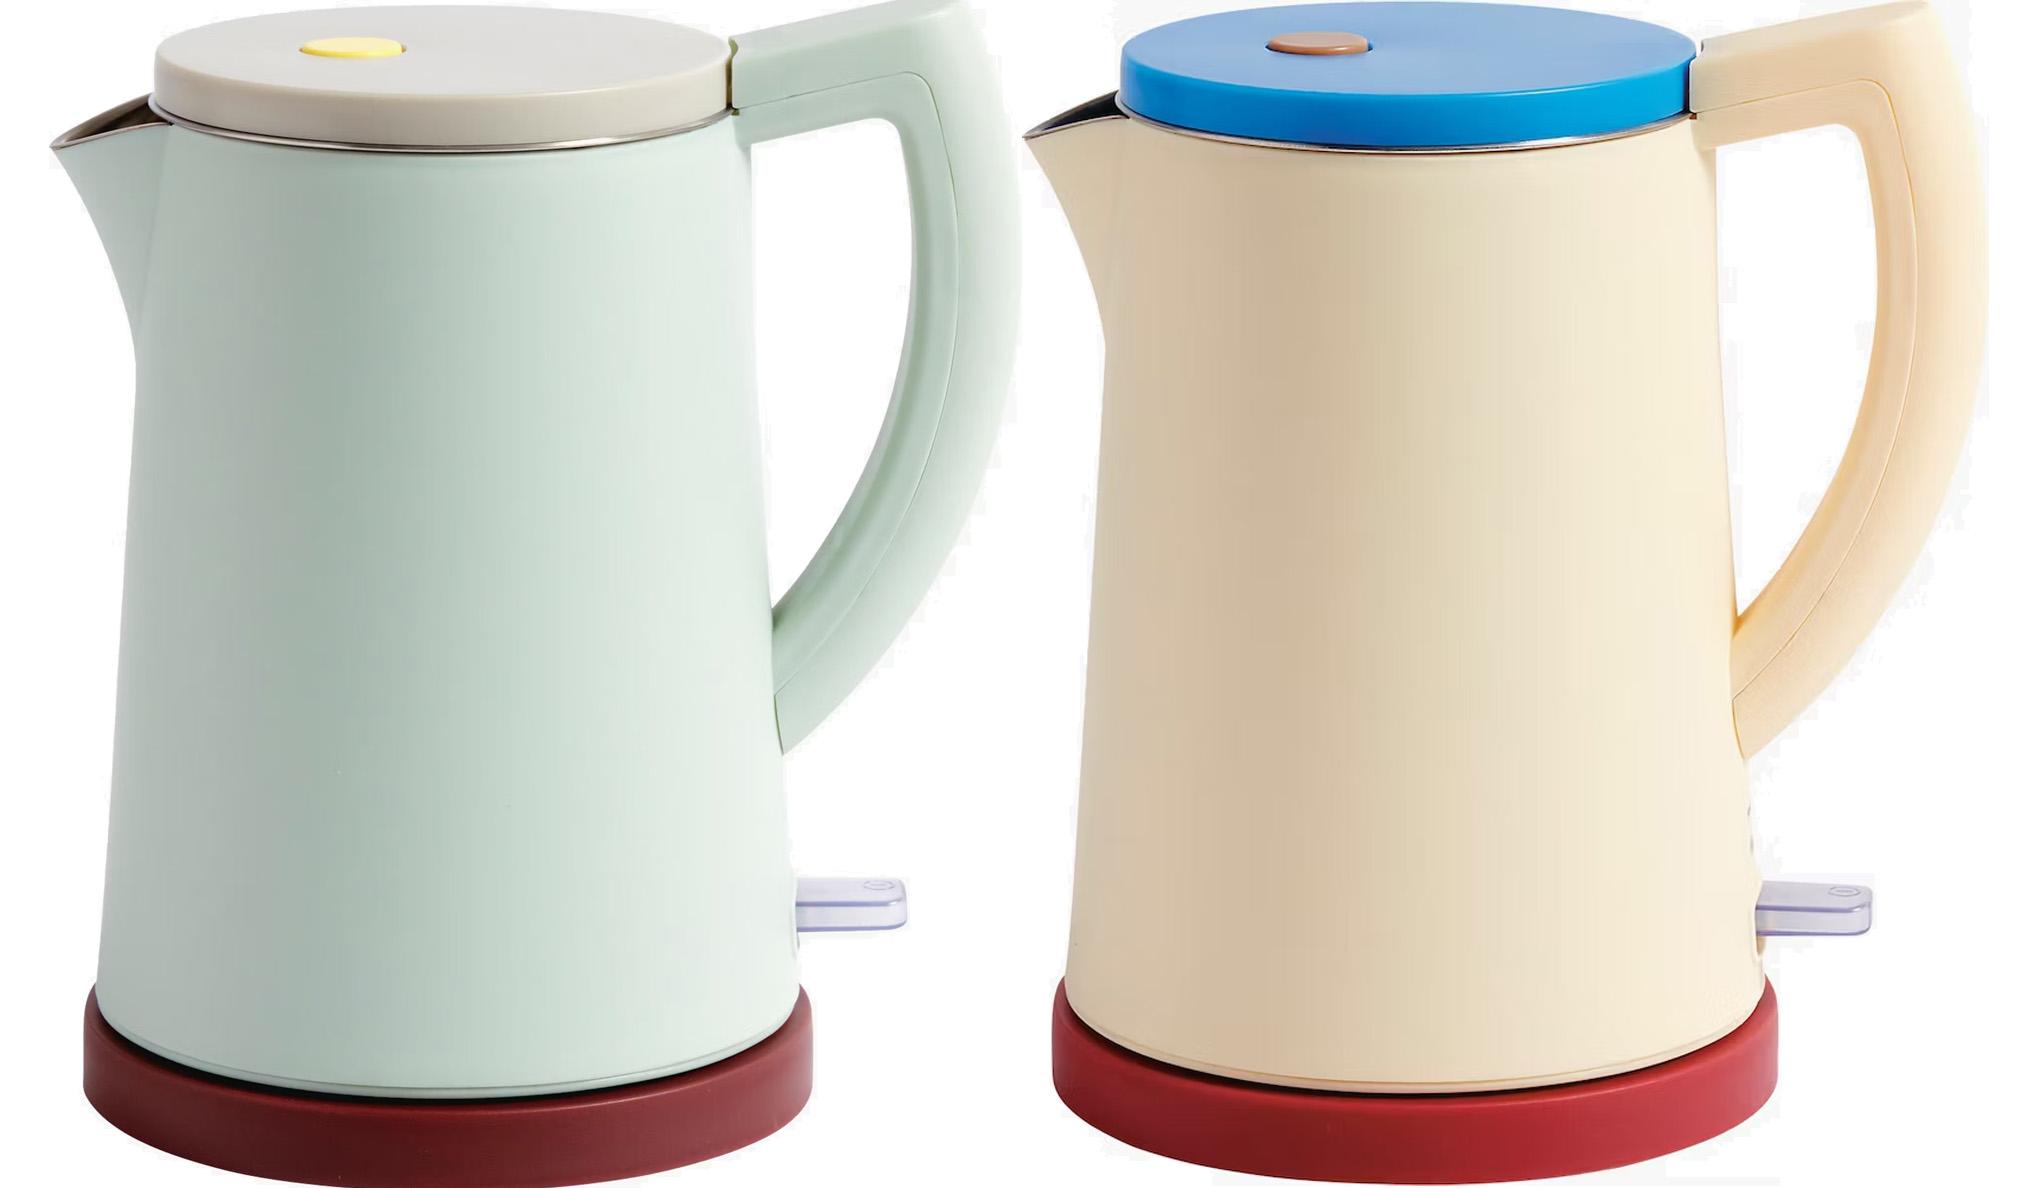 HAY Sowden Double-Walled Electric Kettle for $30 Shipped